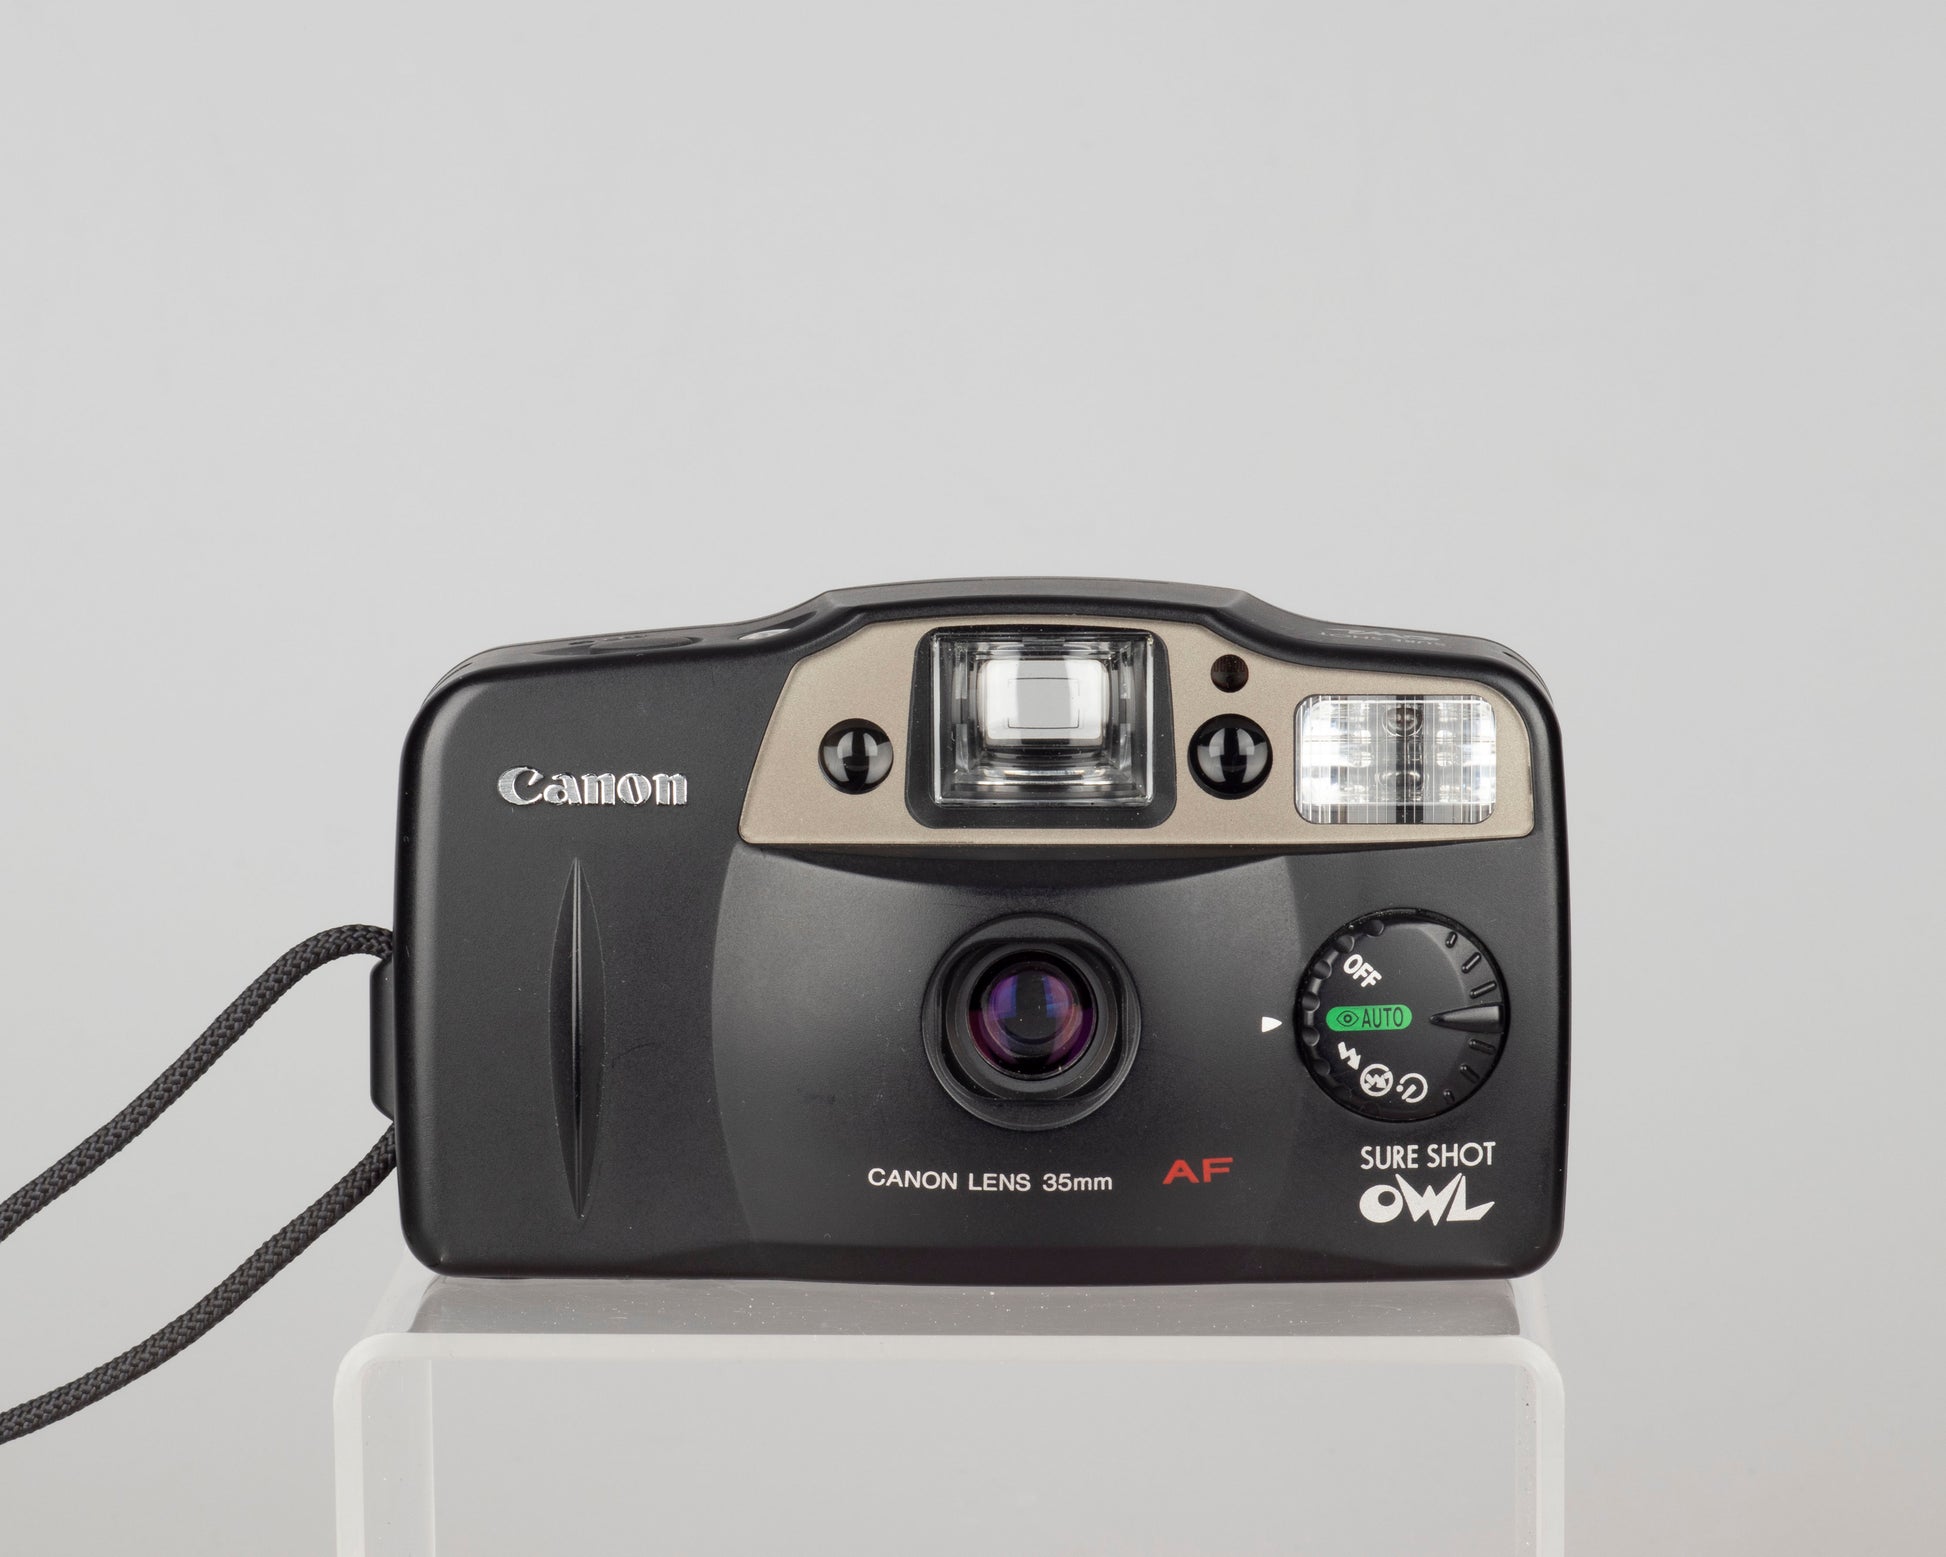 The Canon Sure Shot Owl is a classic 1990s 35mm autofocus point-and-shoot camera with a very user-friendly mode dial